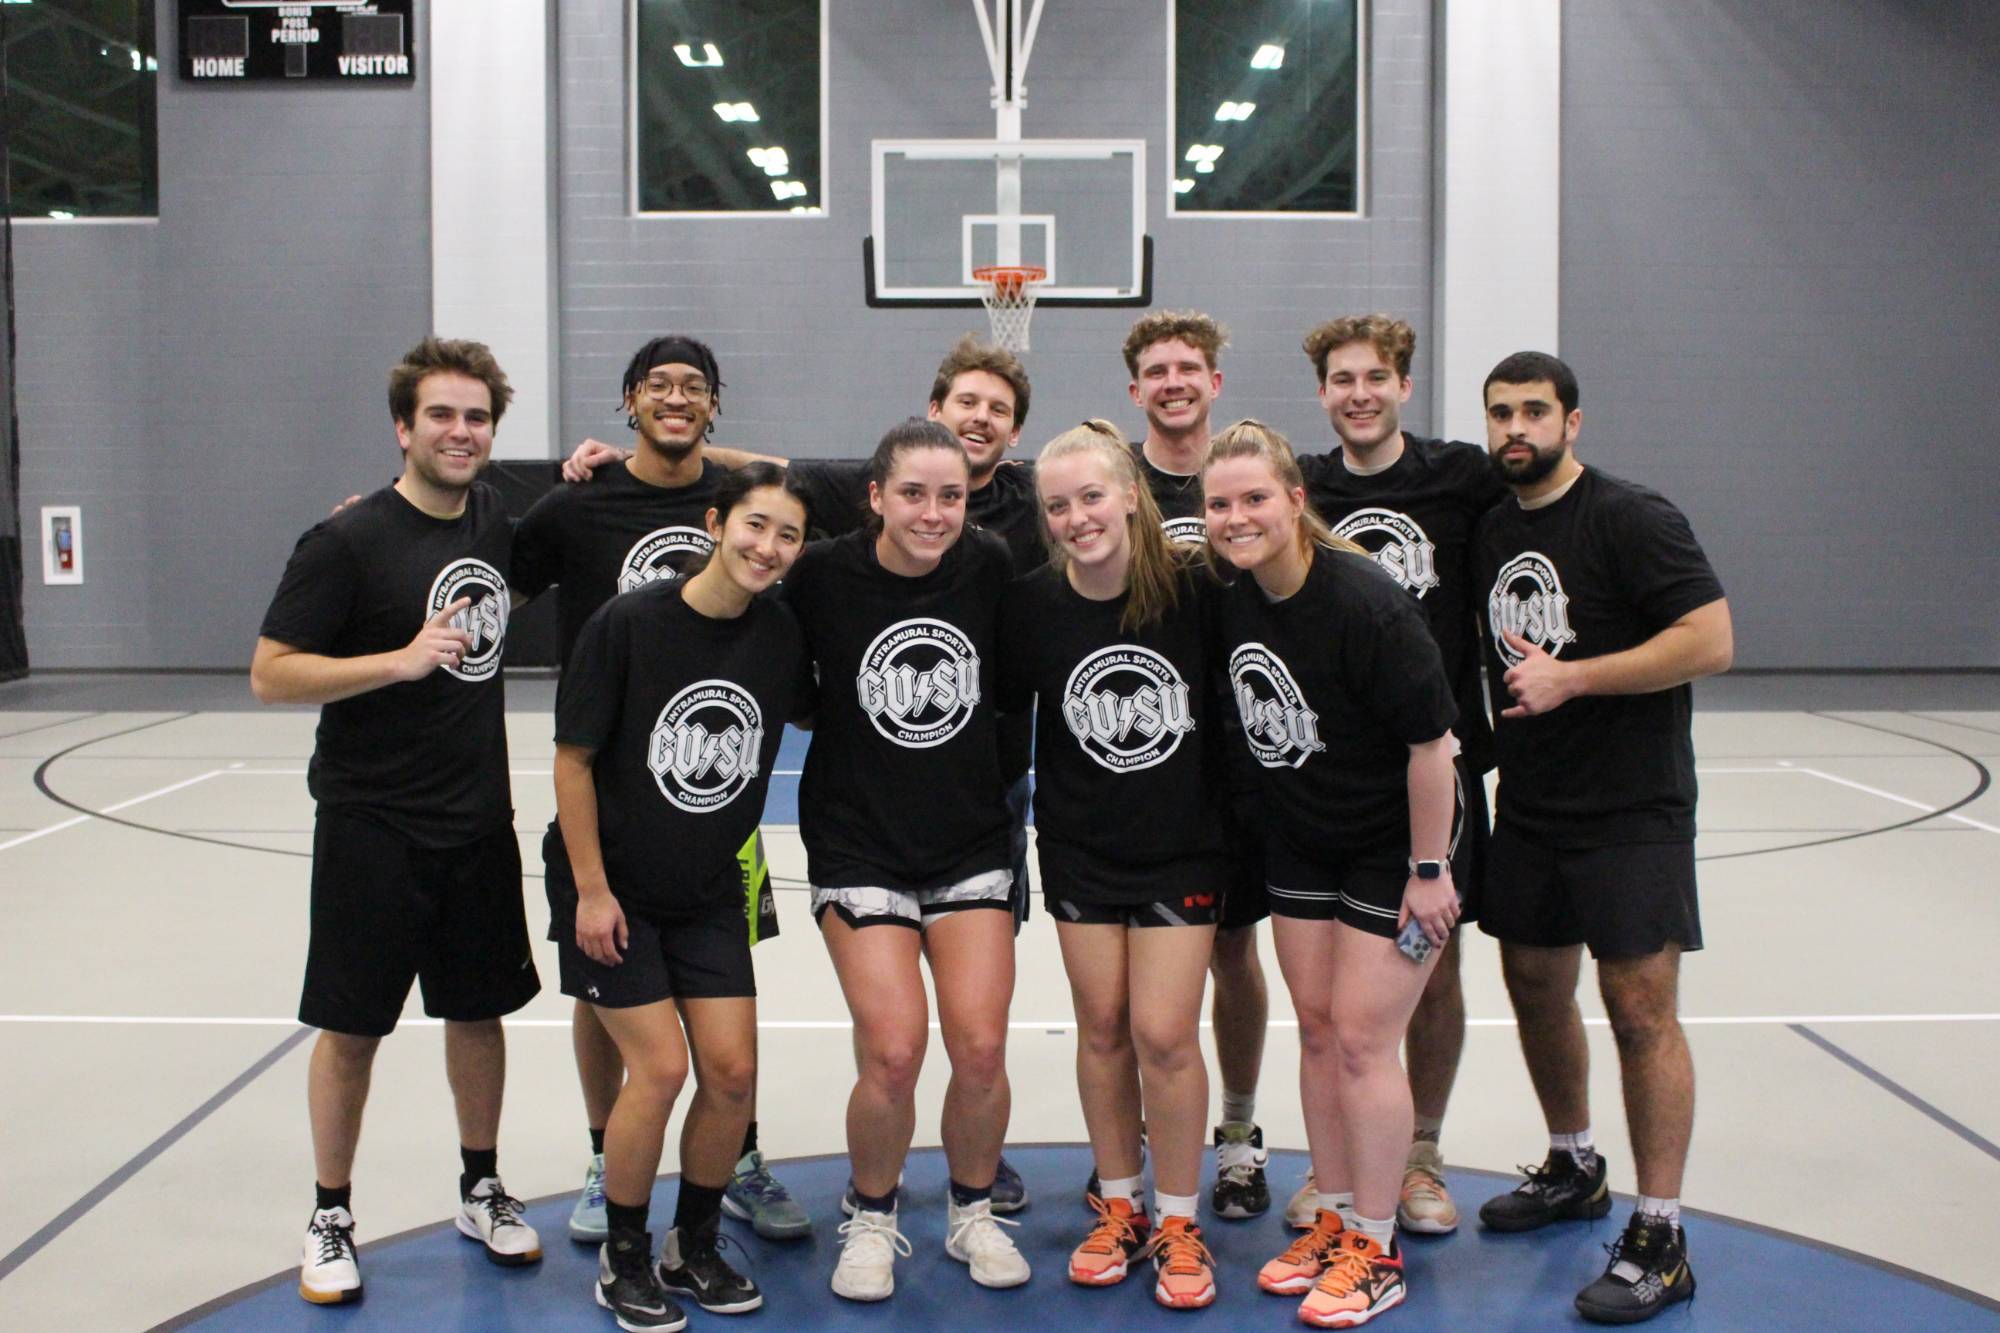 Intramural Sports team photo with students